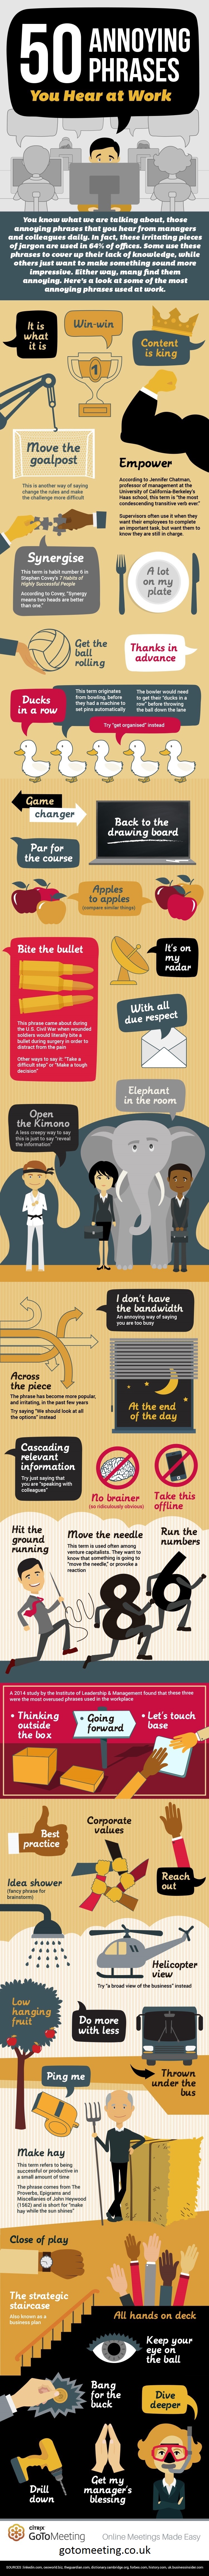 annoying business phrases infographic